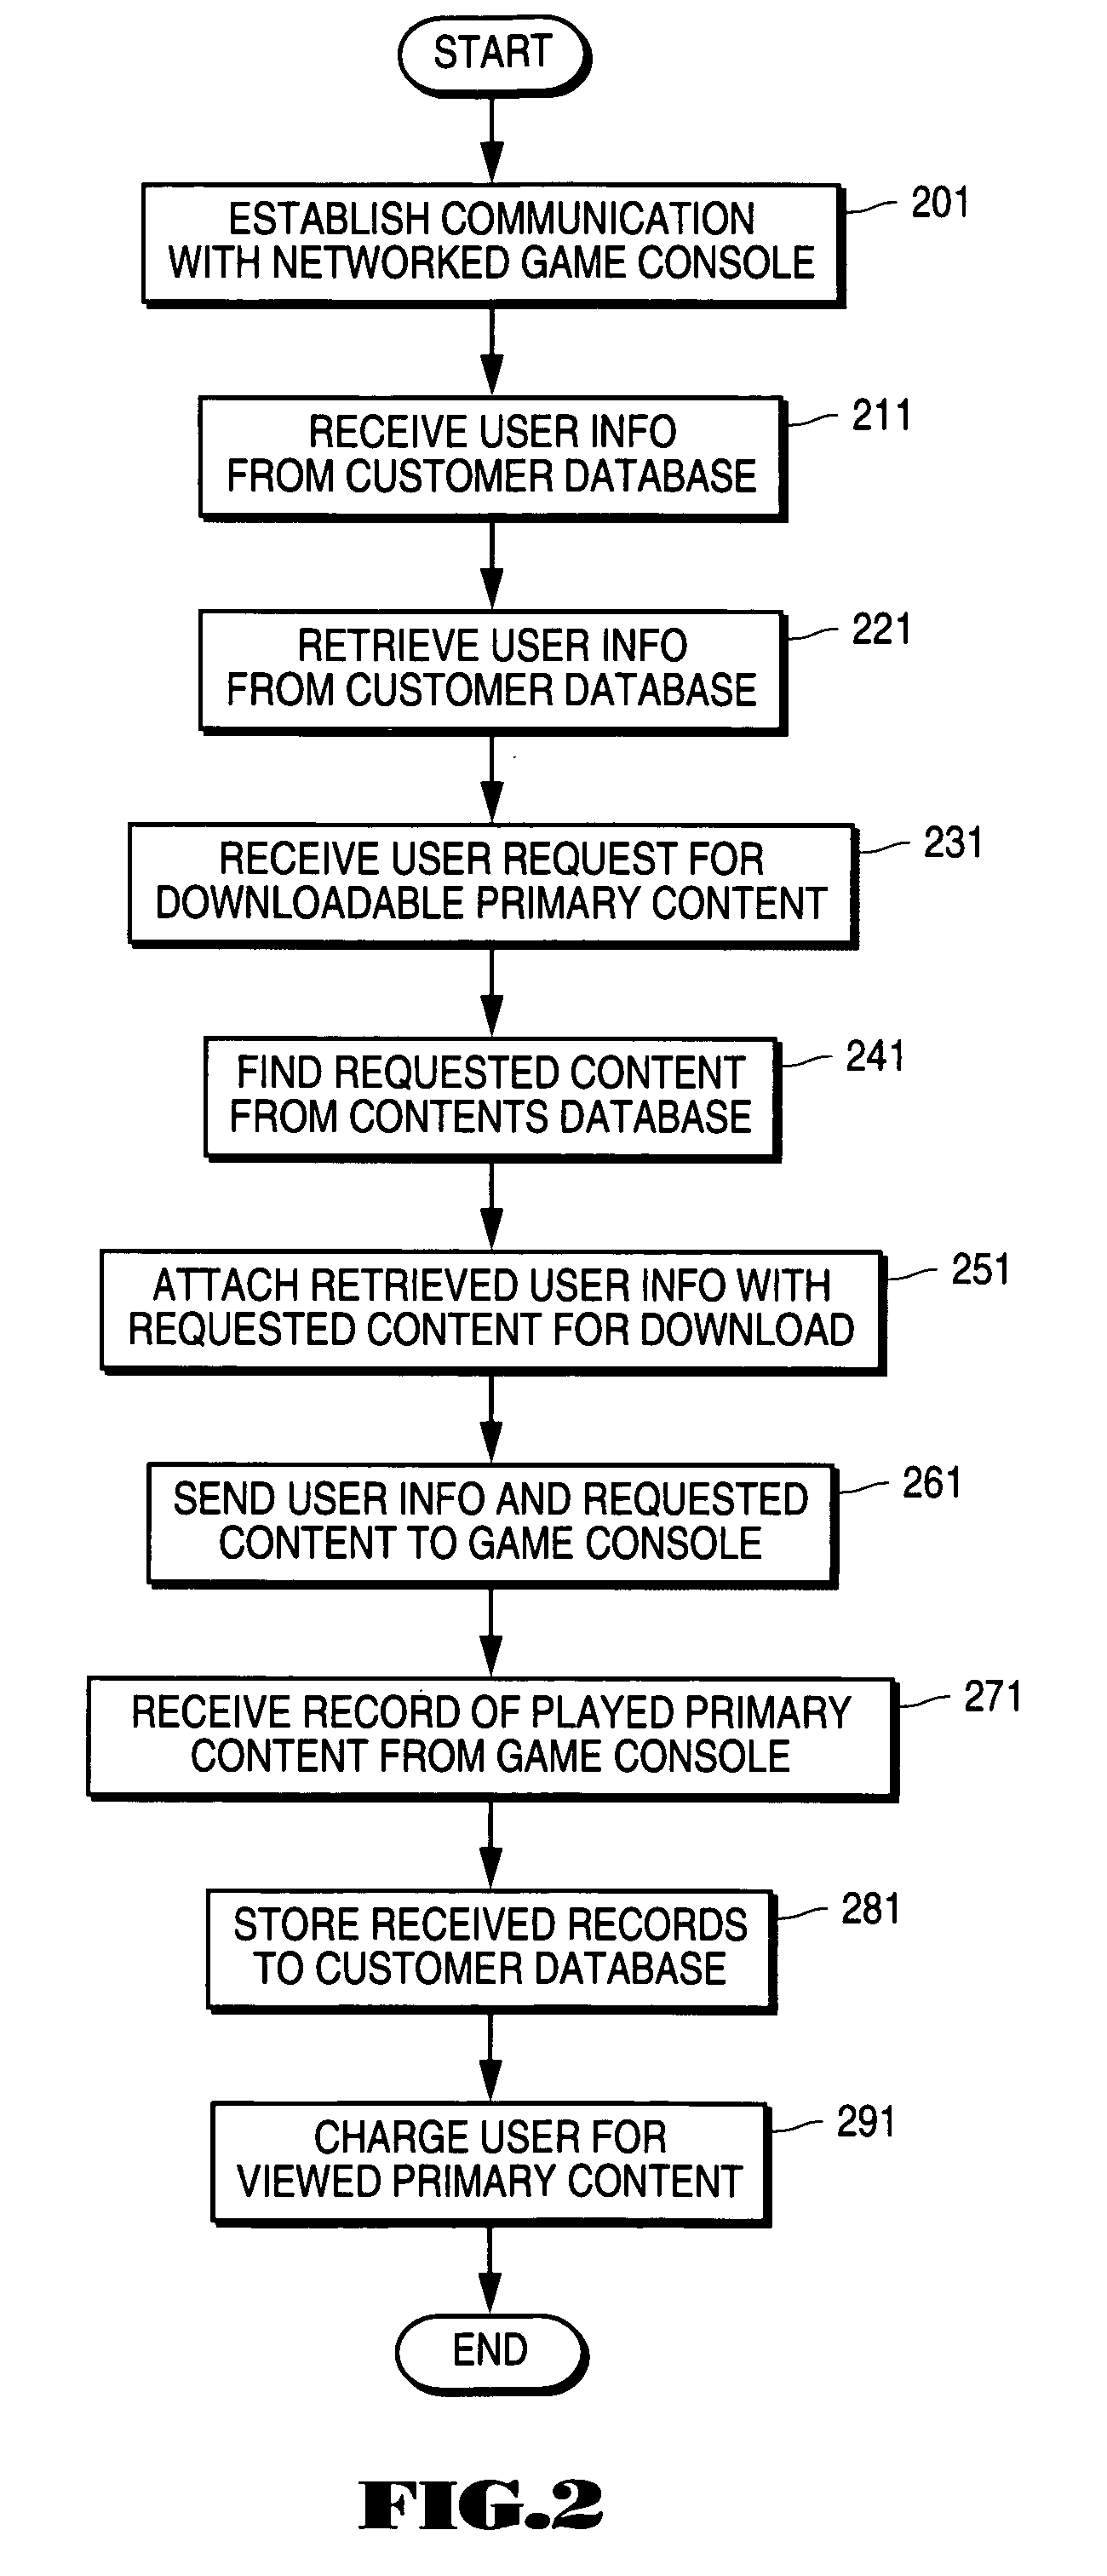 Network-based method and system for transmitting digital data to a client computer and charging only for data that is used by the client computer user